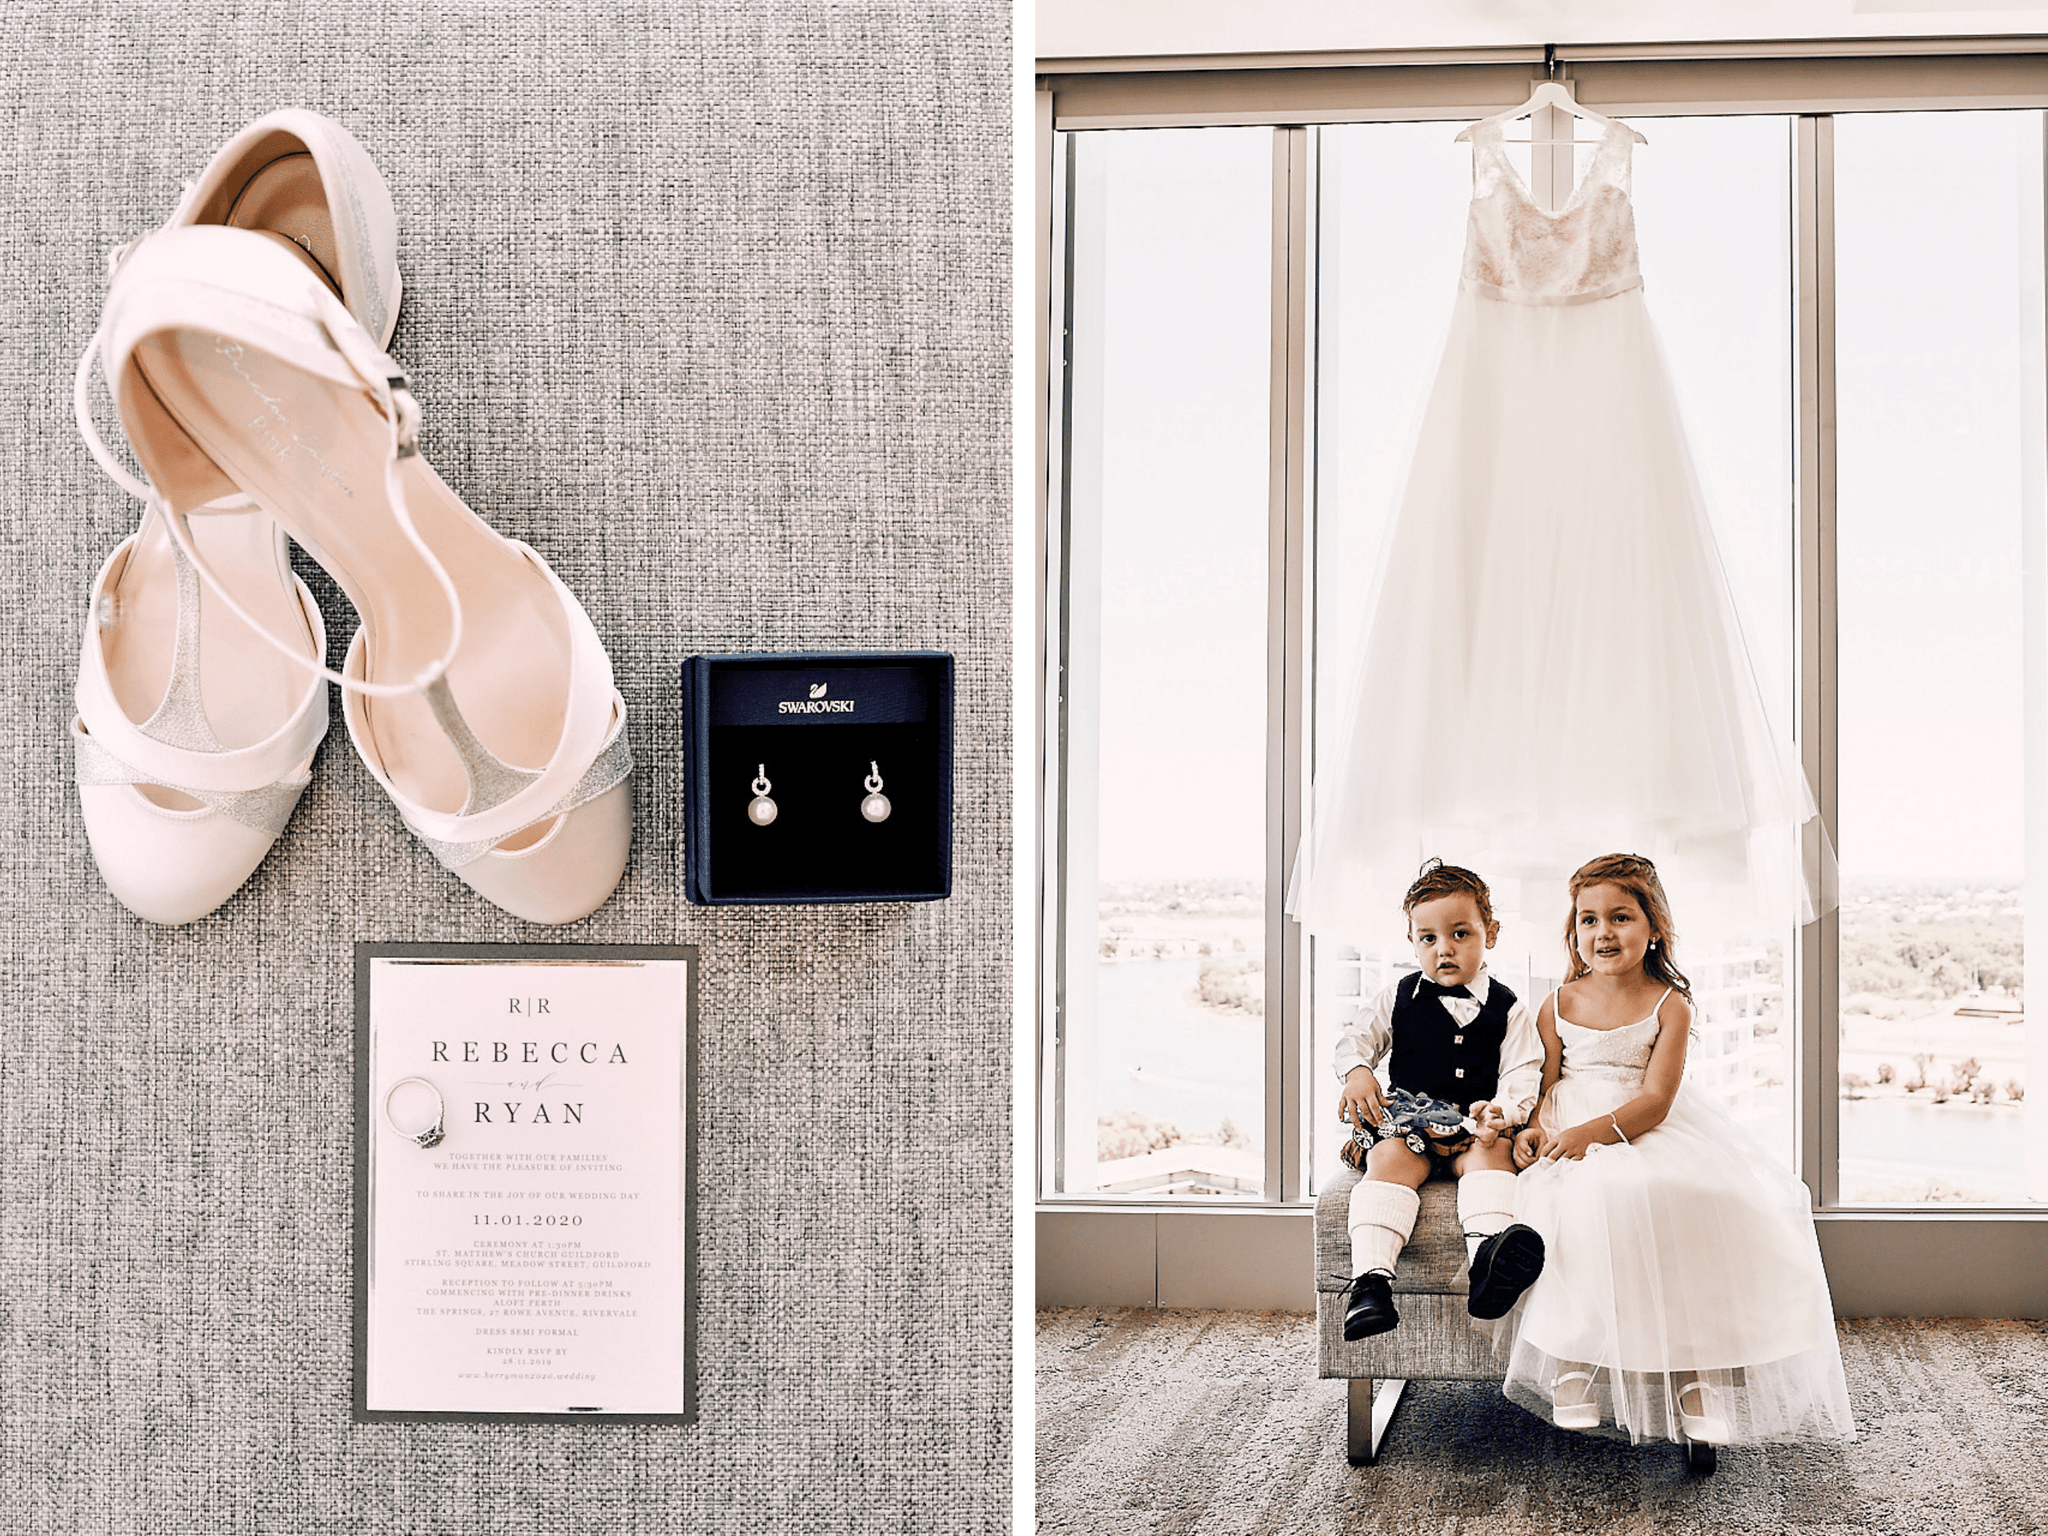 Bec & Ryan's Aloft Hotel Perth Wedding | Bridal Party Kids, and Bridal Shoes, Jewellery and Invitation